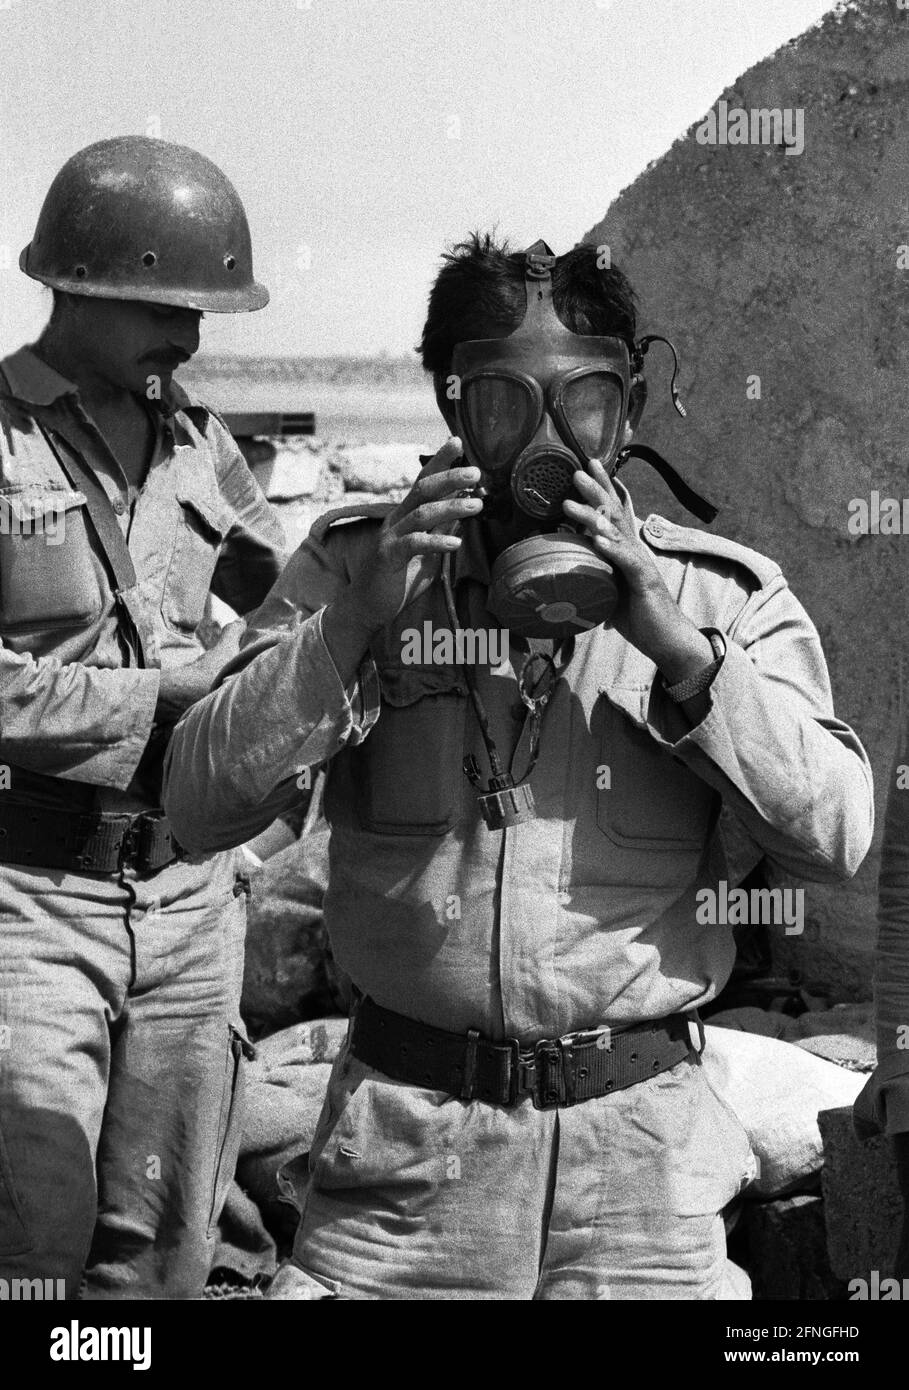 Kuwait, 8/28/1990 Archive #: 20-66 On August 2, 1990, Iraq invaded the neighboring emirate of Kuwait. Five months later, an international coalition led by the United States intervened in the conflict and pushed Iraqi forces back across the border.  Photo: Iraqi soldiers with gas masks [automated translation] Stock Photo